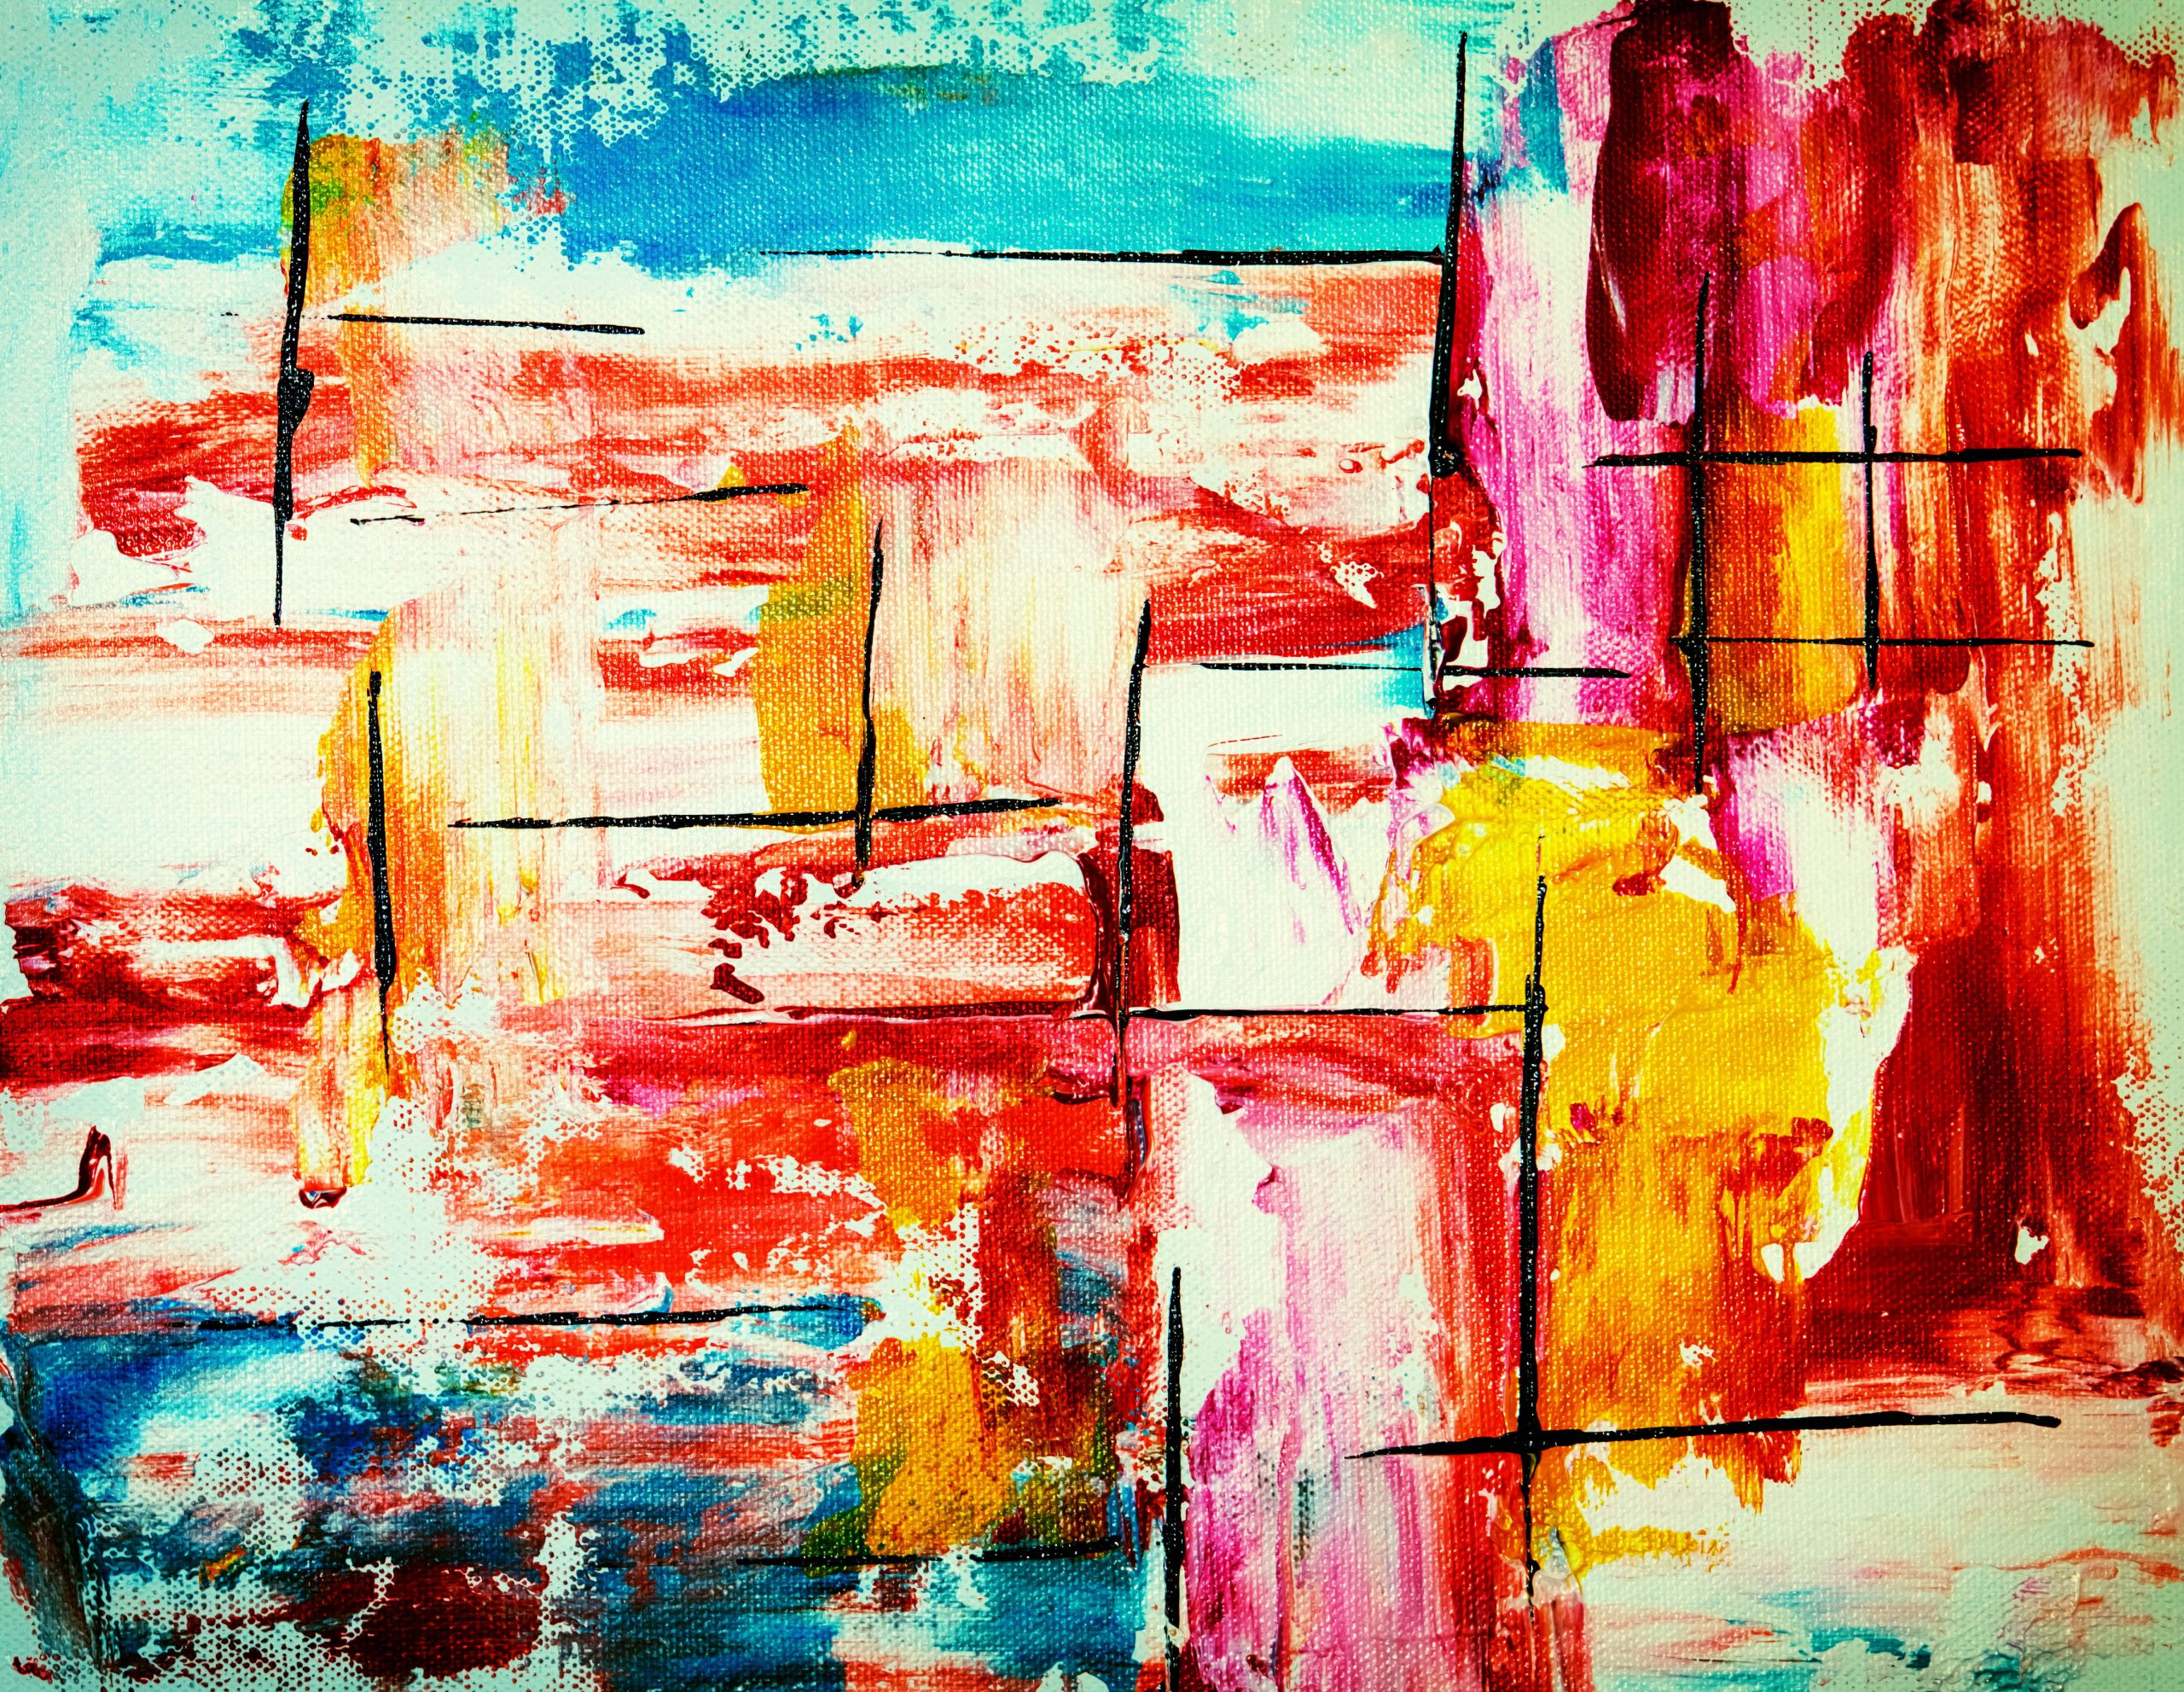 Multicolored Abstract Painting 4k wallpaper, abstract expressionism